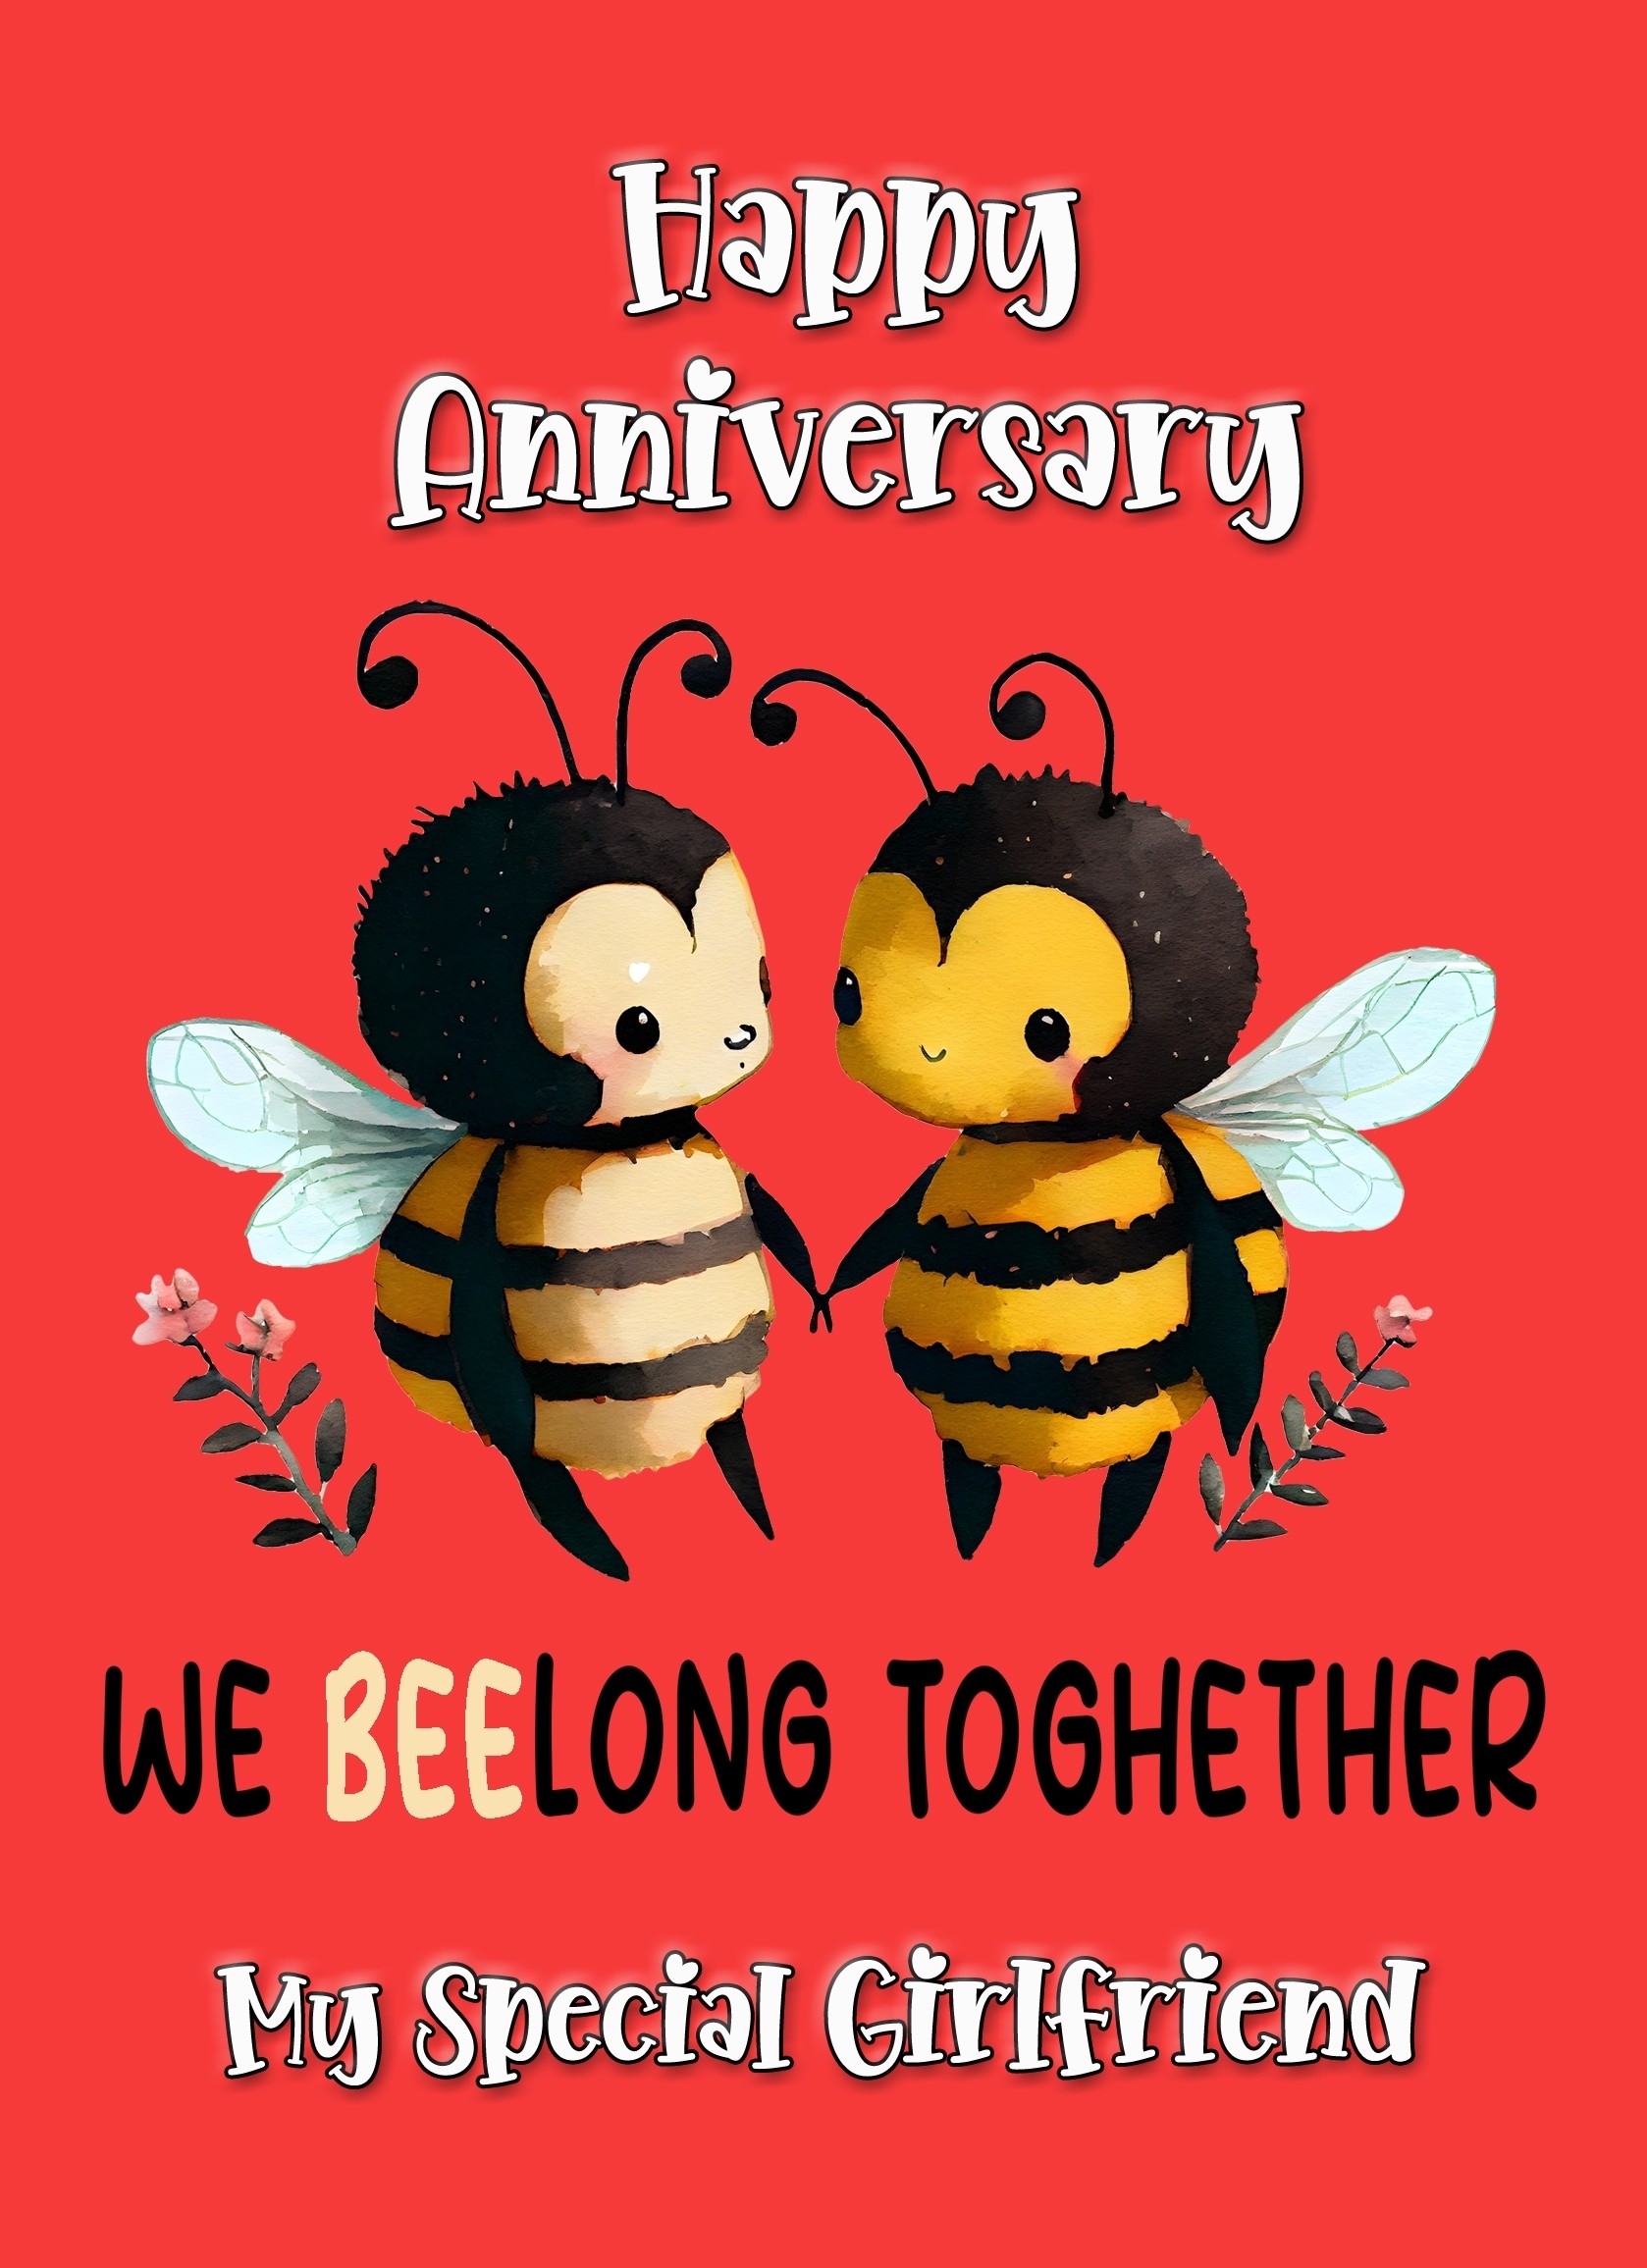 Funny Pun Romantic Anniversary Card for Girlfriend (Beelong Together)